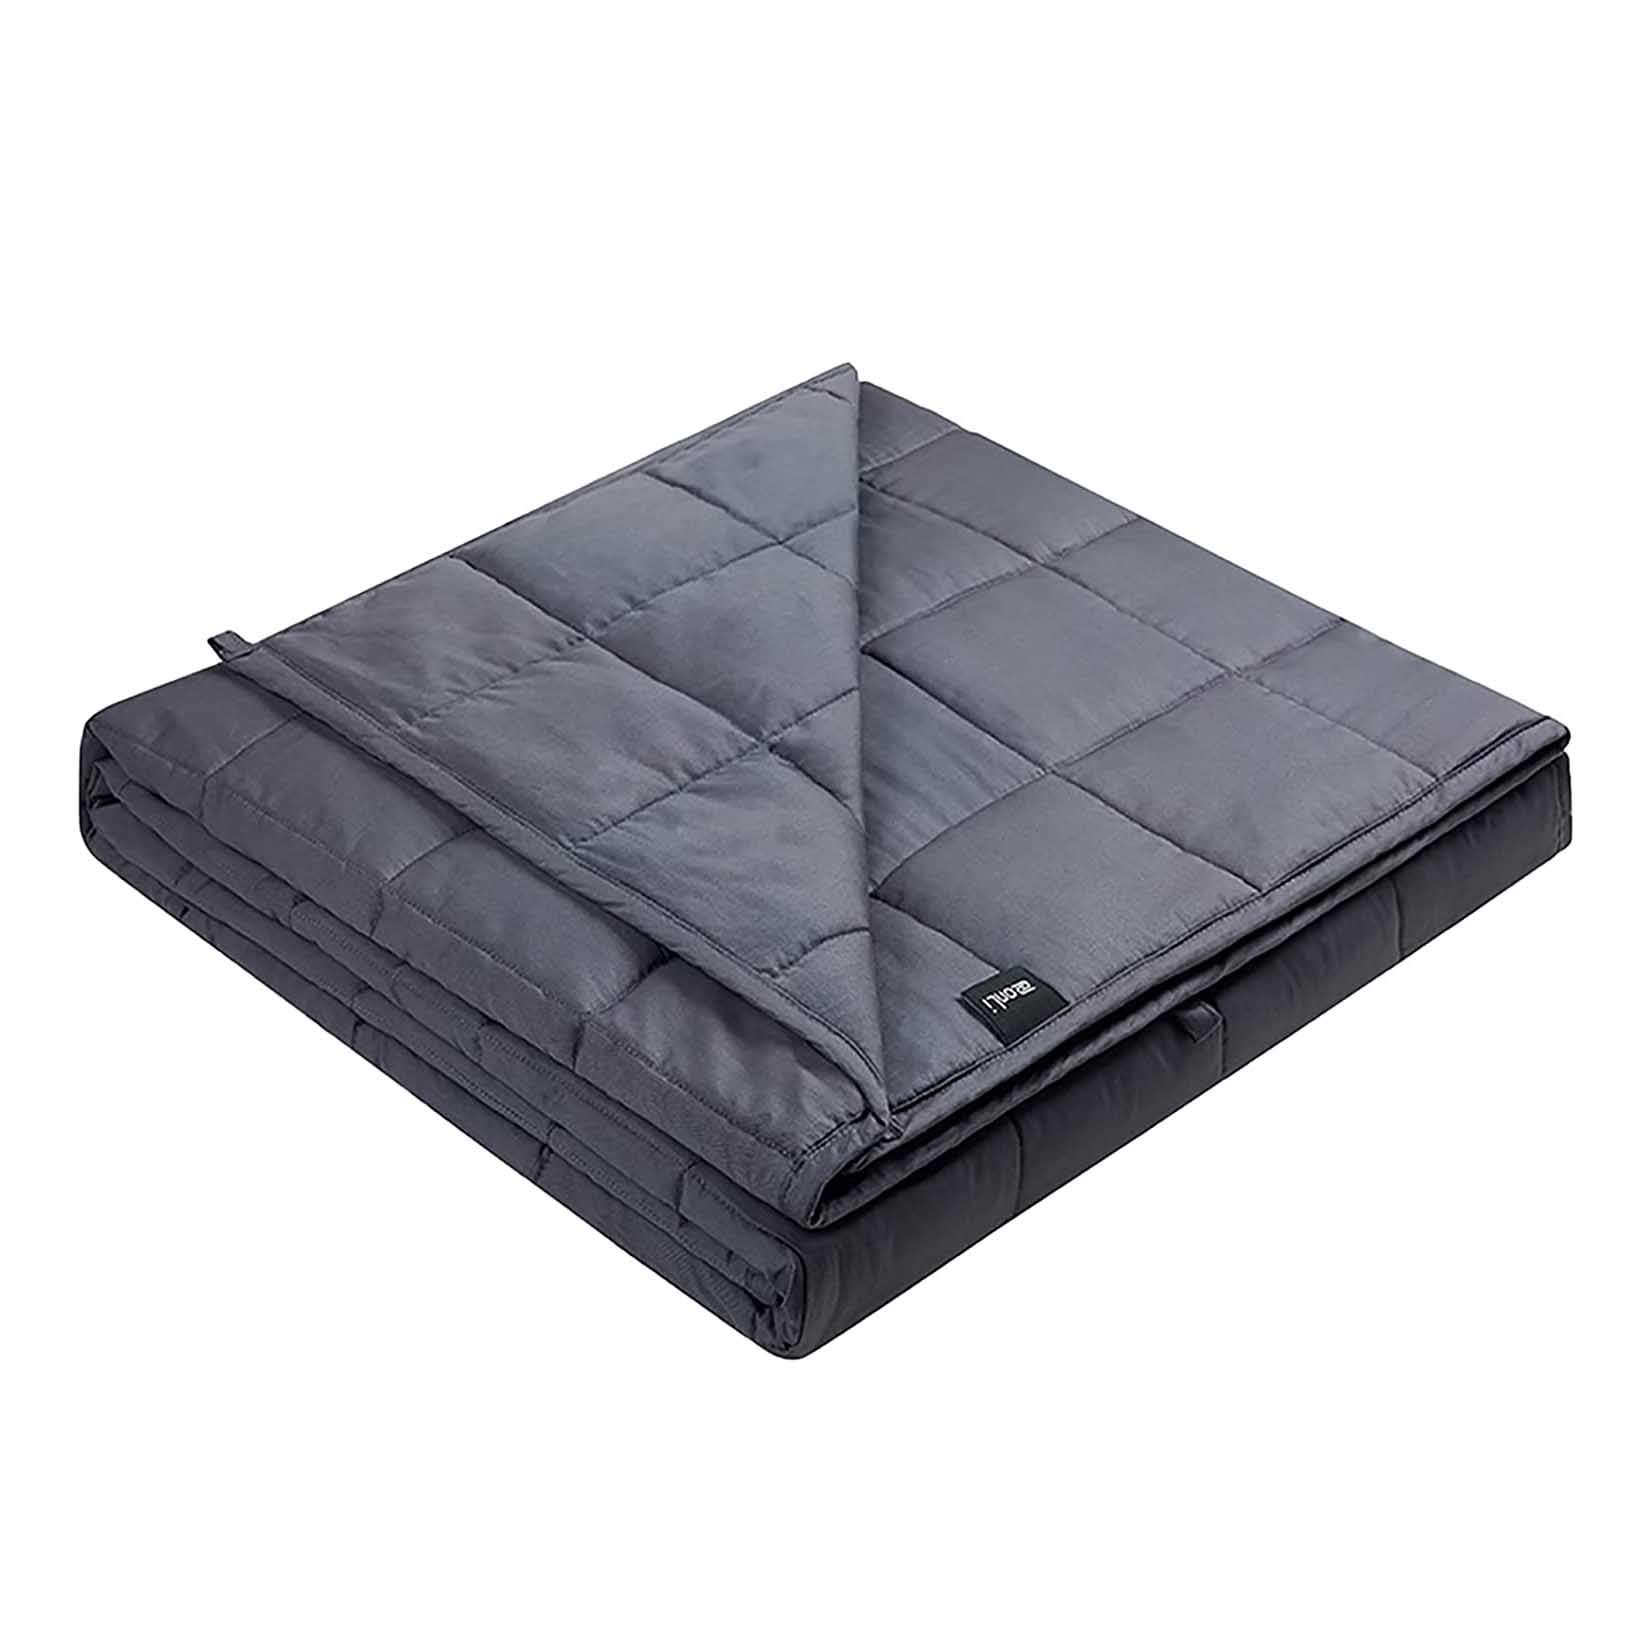 Wholesale High Quality Weighted Blanket Supplier- Weighted Blanket (60”x80”, 20lbs, Dark Grey), Cooling Weighted Blanket for Adults, High Breathability Heavy Blanket, Soft Material wit...